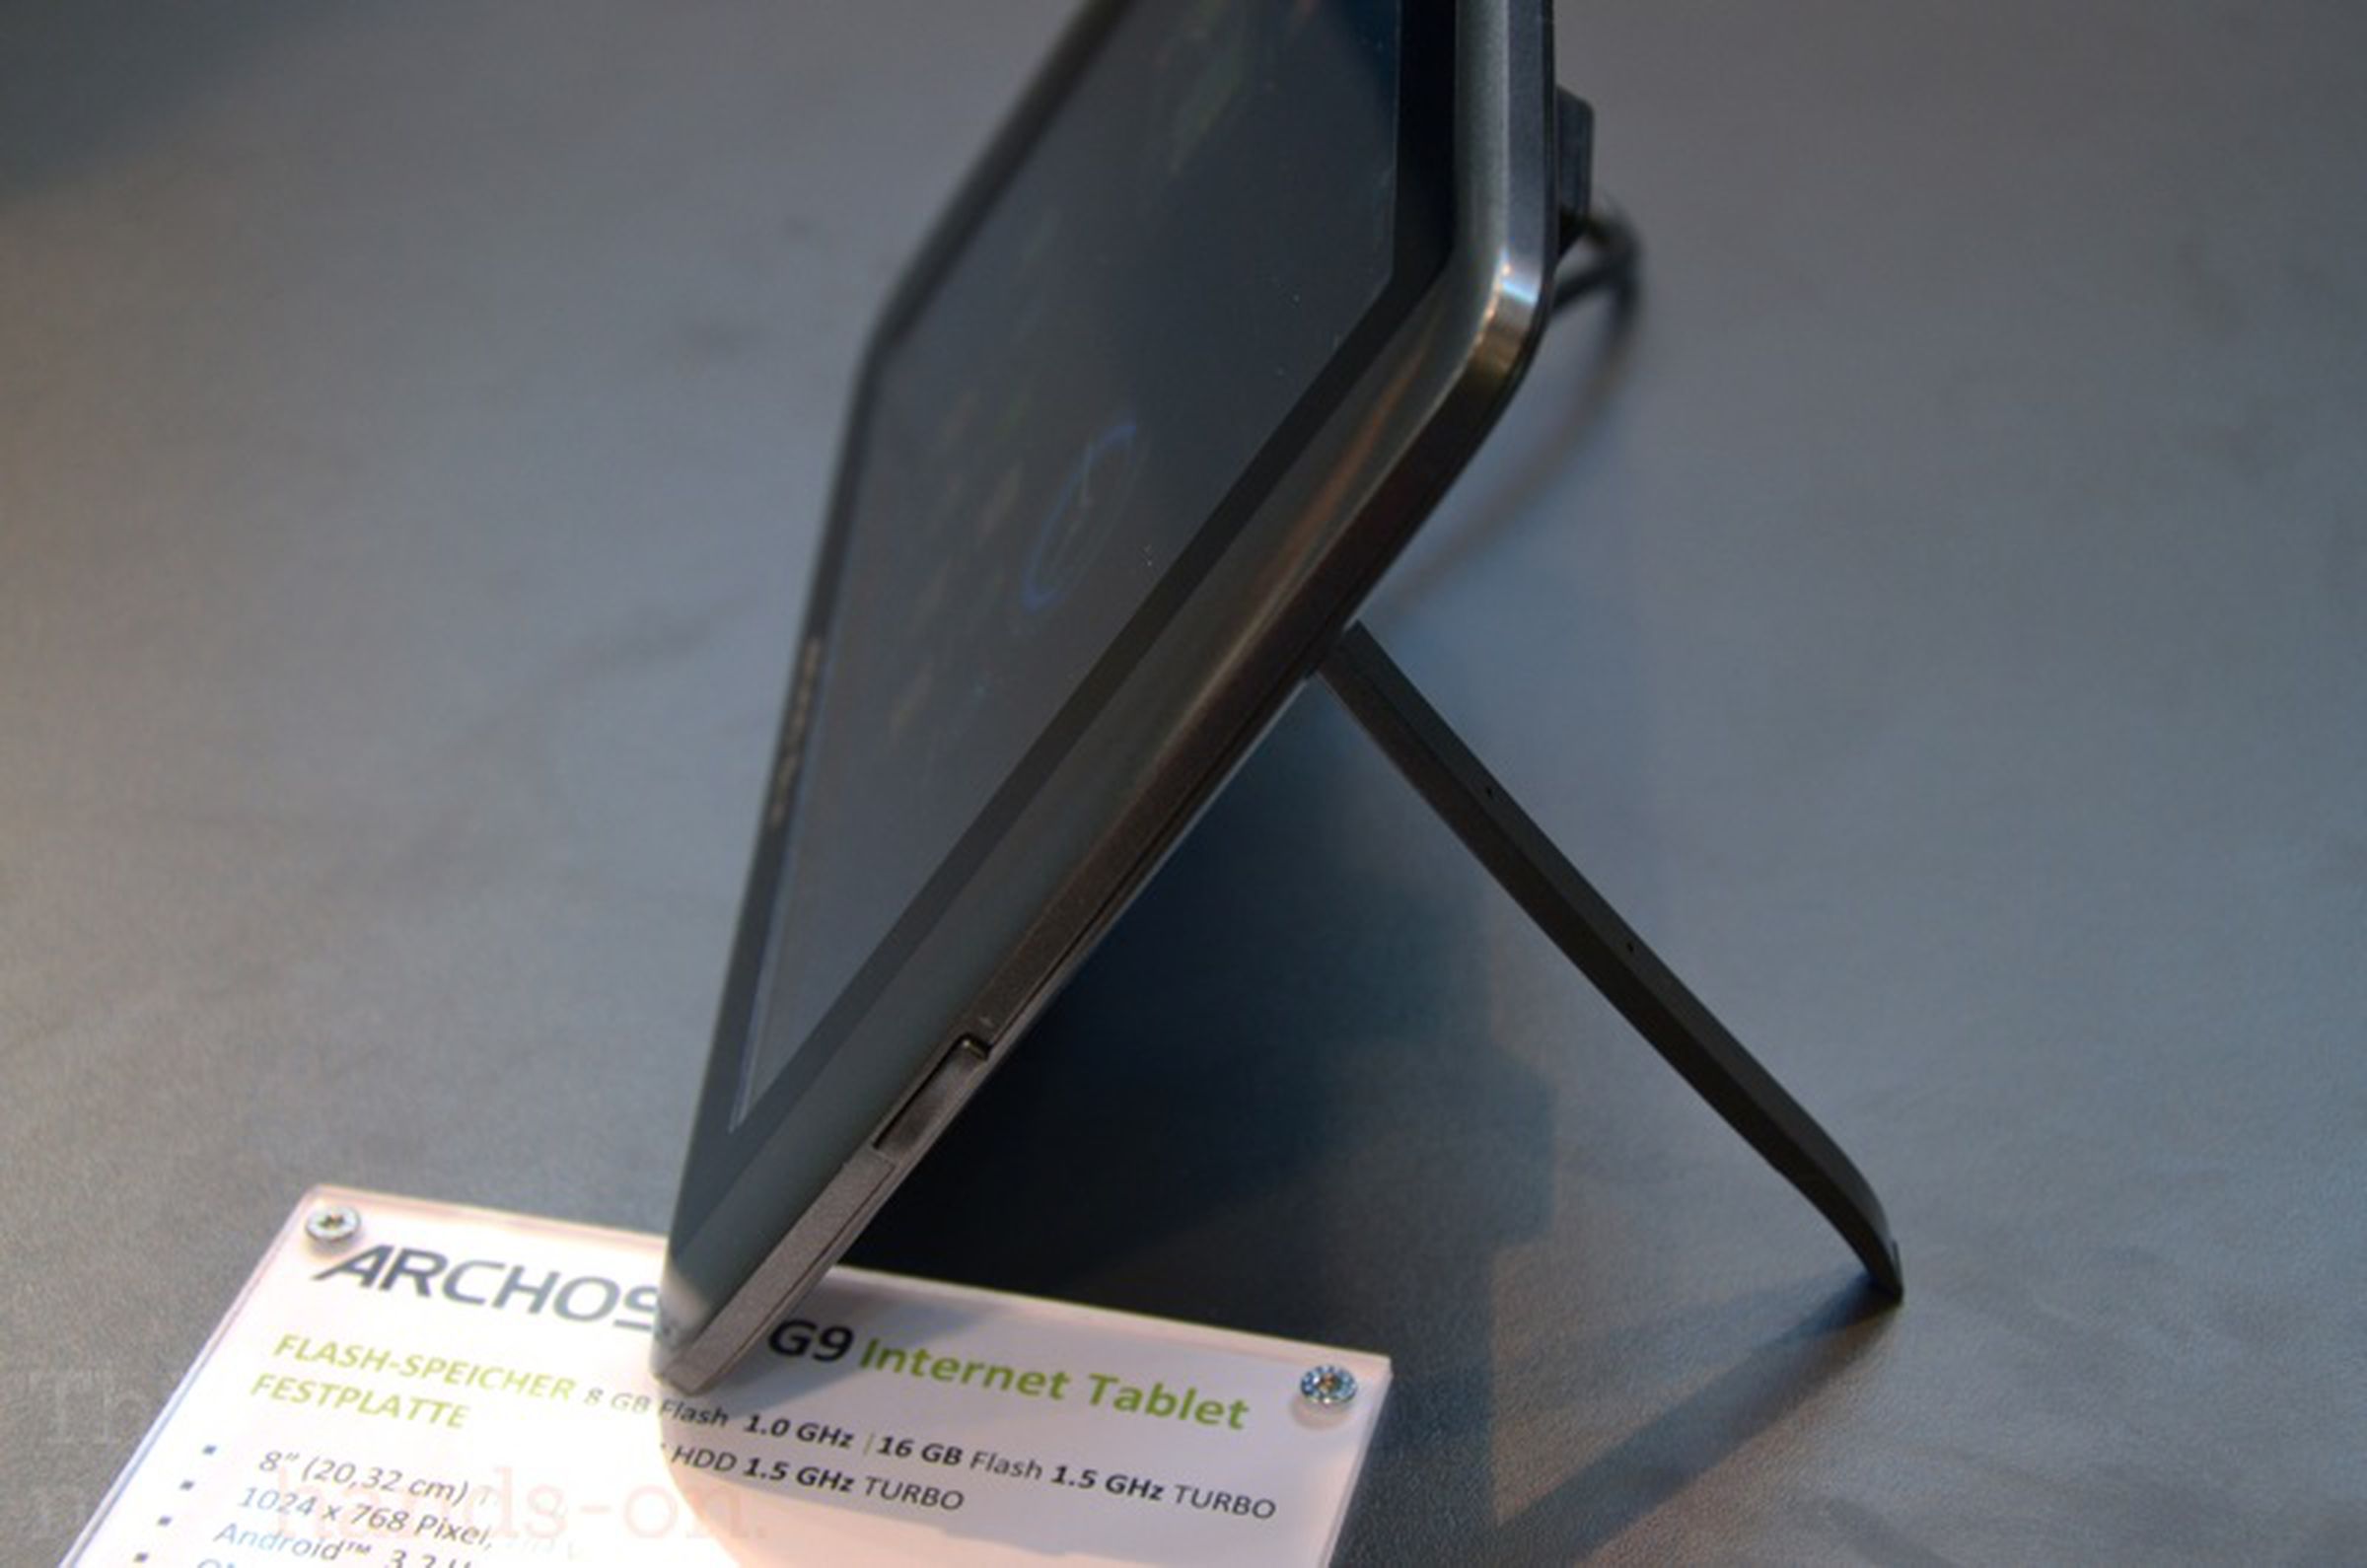 Archos 101 G9 and 80 G9 hands-on photos